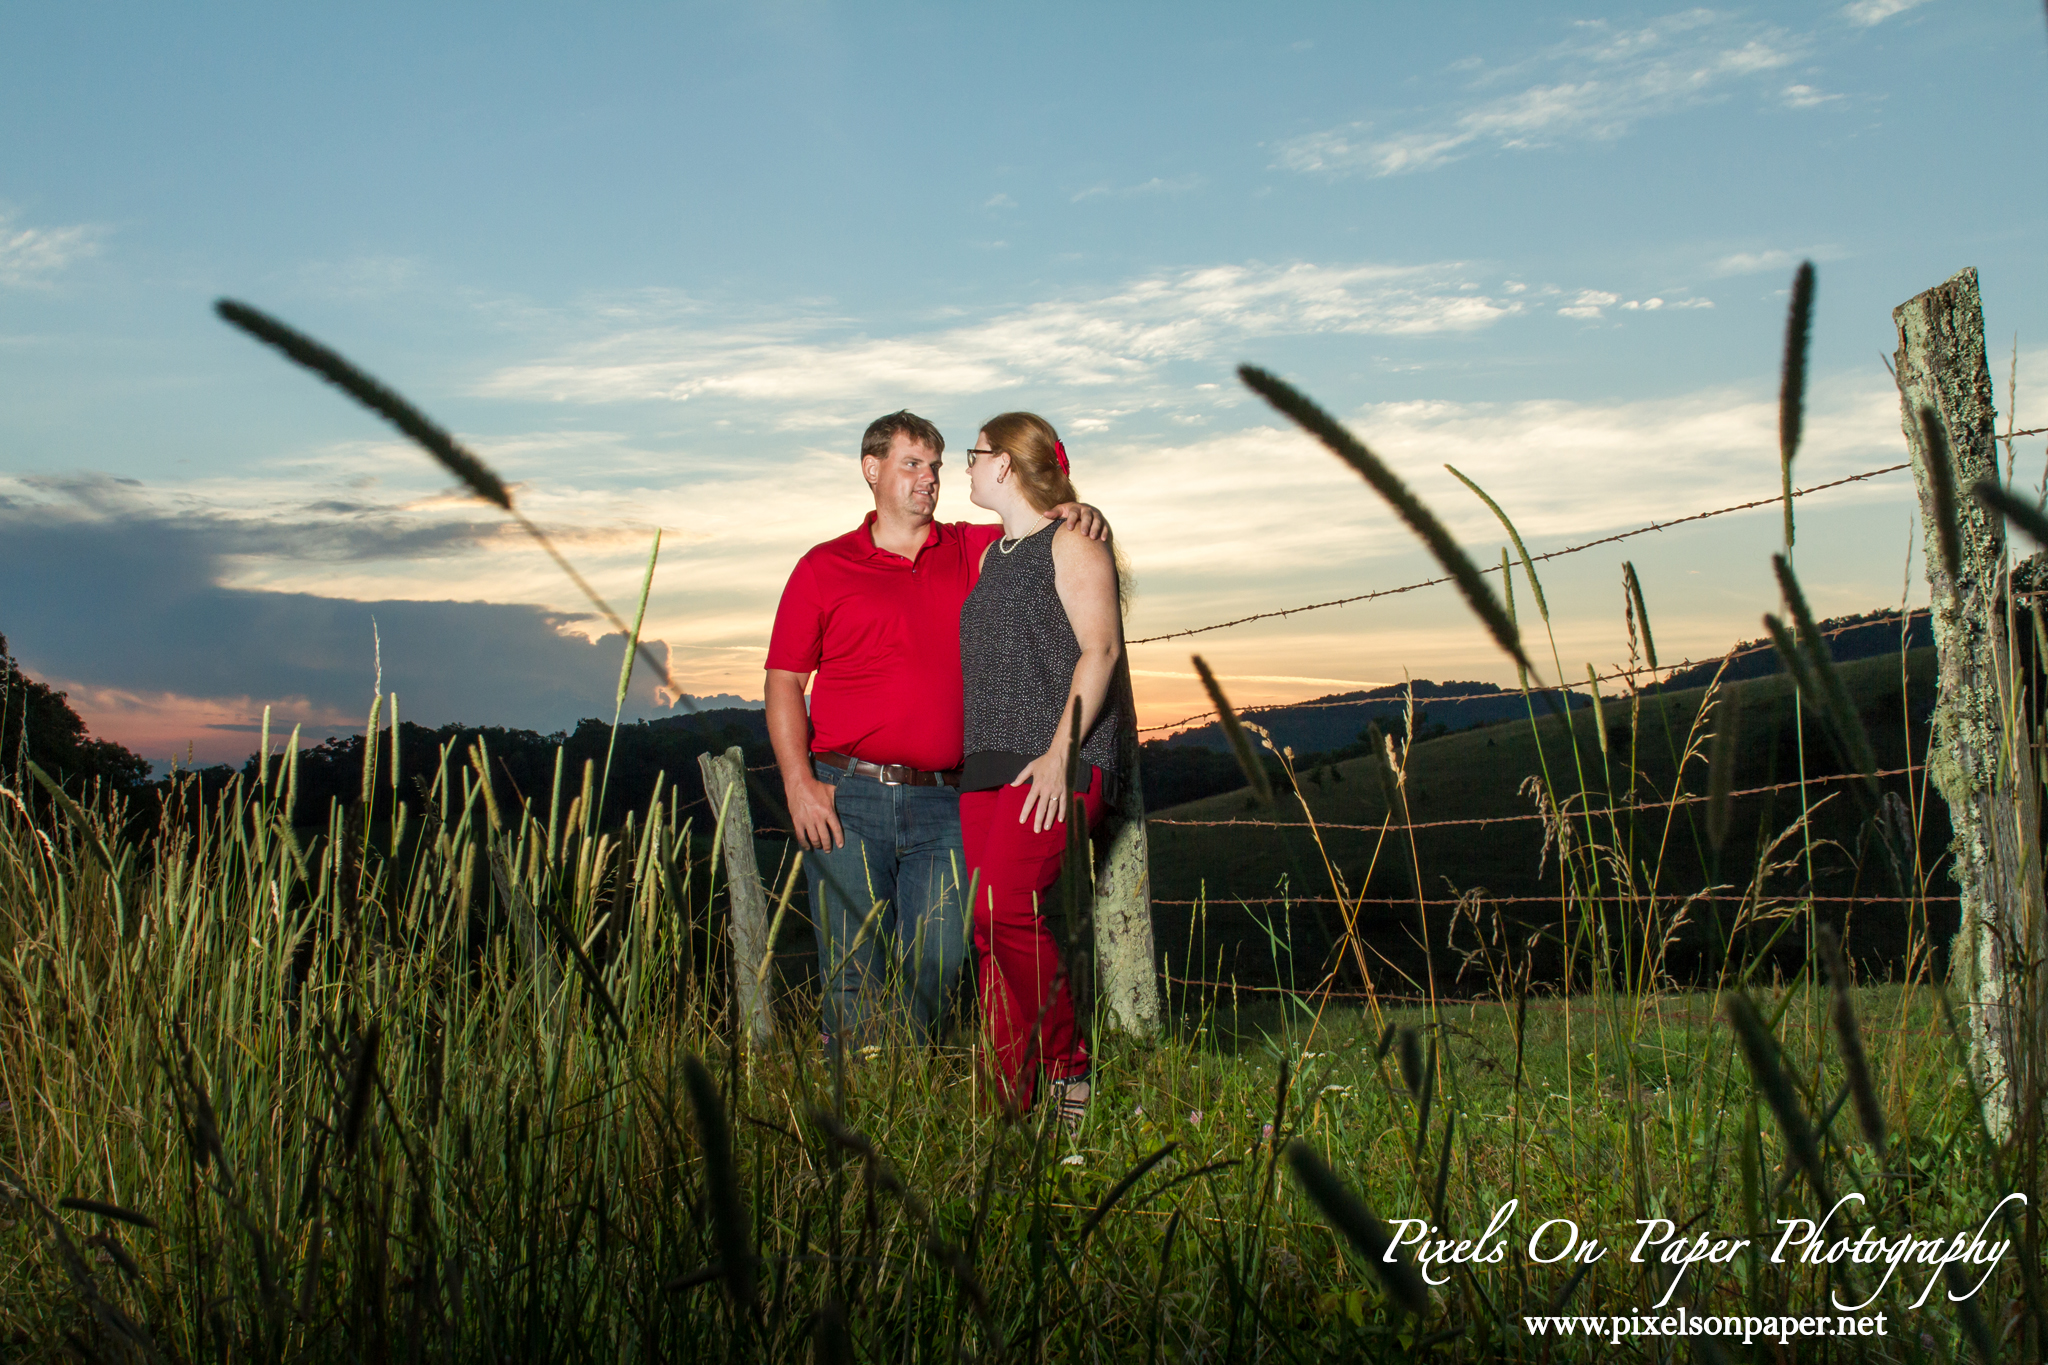 Blowing Rock NC wedding photographer, pixels on paper photographers outdoor engagement photo